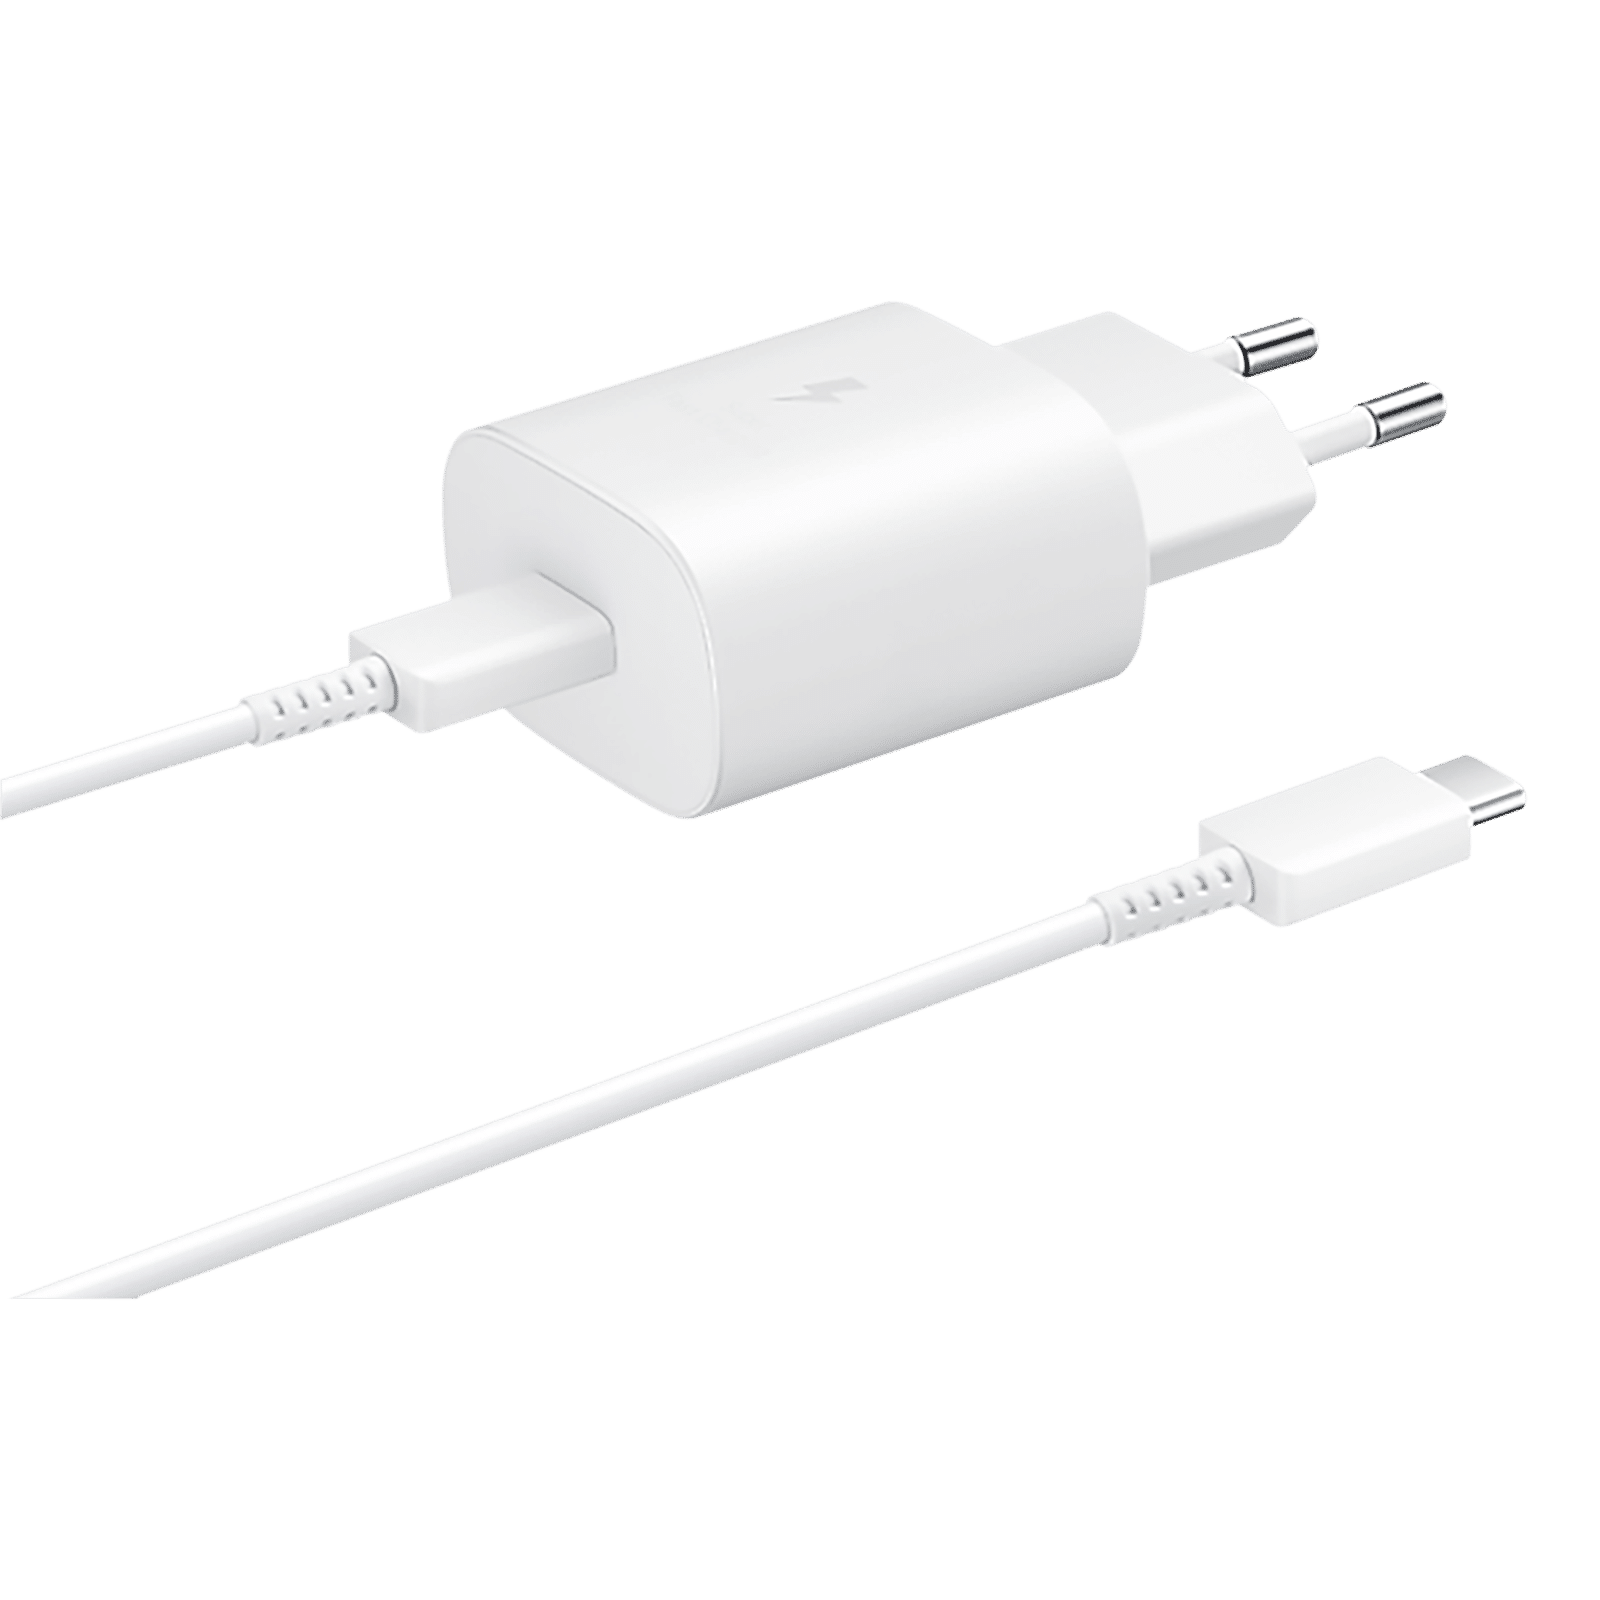 Samsung USB-C to USB-C Cable Unboxing and First Impressions, Power  Delivery